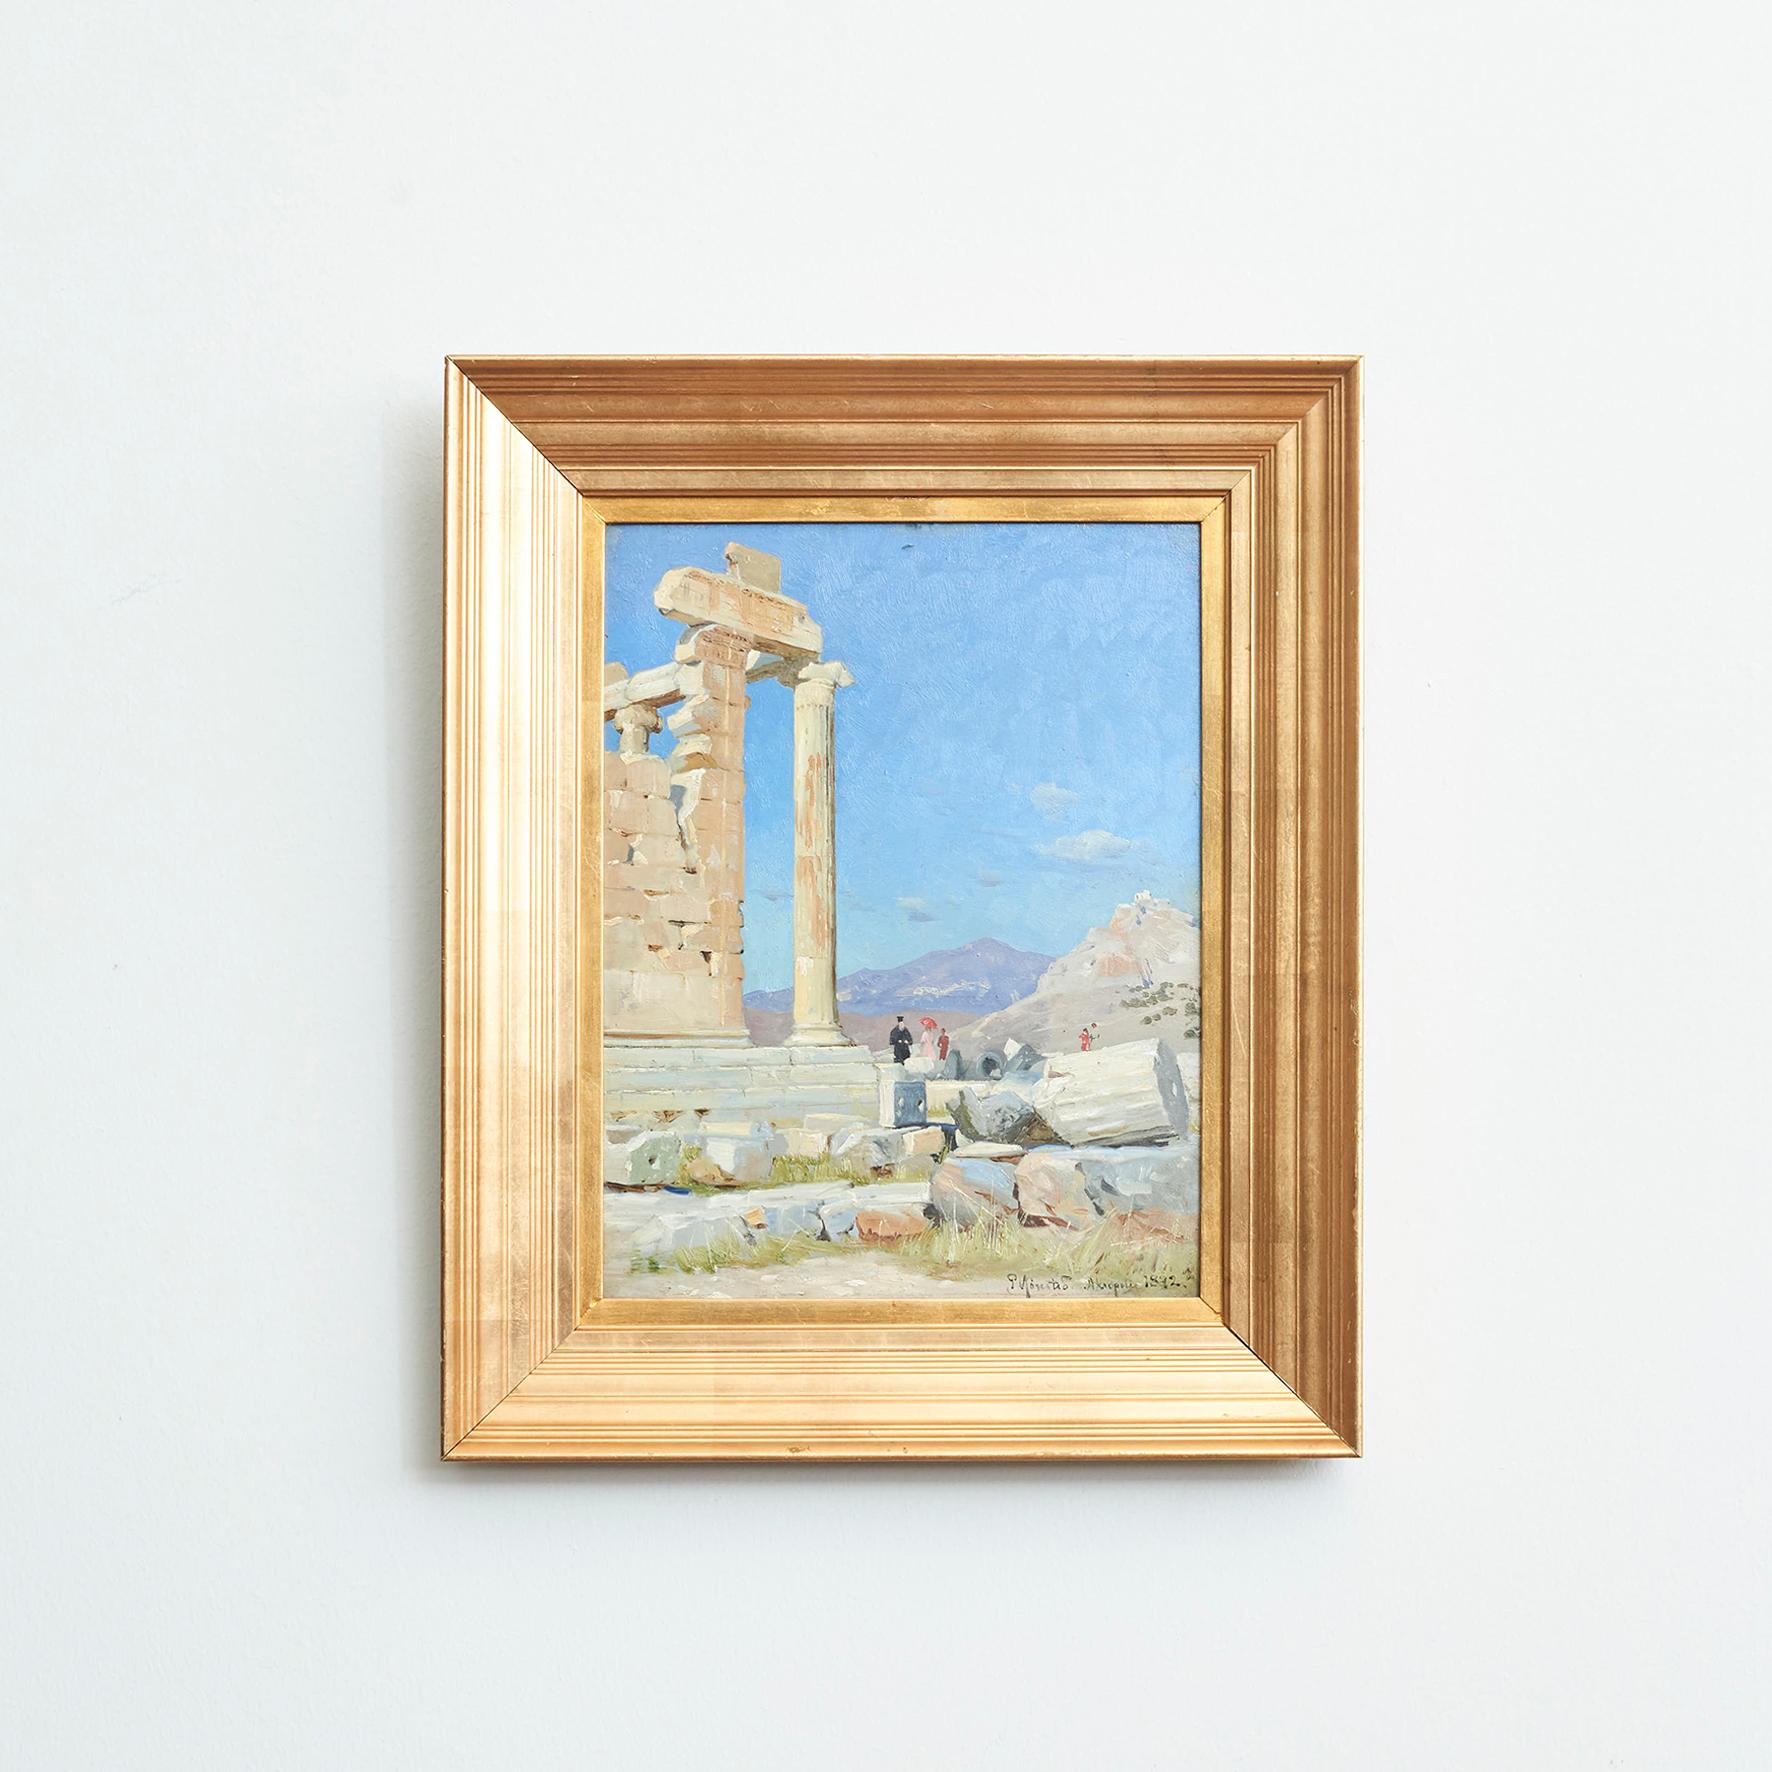 Peder Mønsted (Danish painter, b. 1859, d. 1941).
Motif of Acropolis (Athens). Signed: P. Mønsted, Akropolis 1892.
Oil on cardboard. An atmospheric and charming little picture.


Measures: Painting H 34 cm, W 26 cm
Incl. frame H 47.5 cm, W